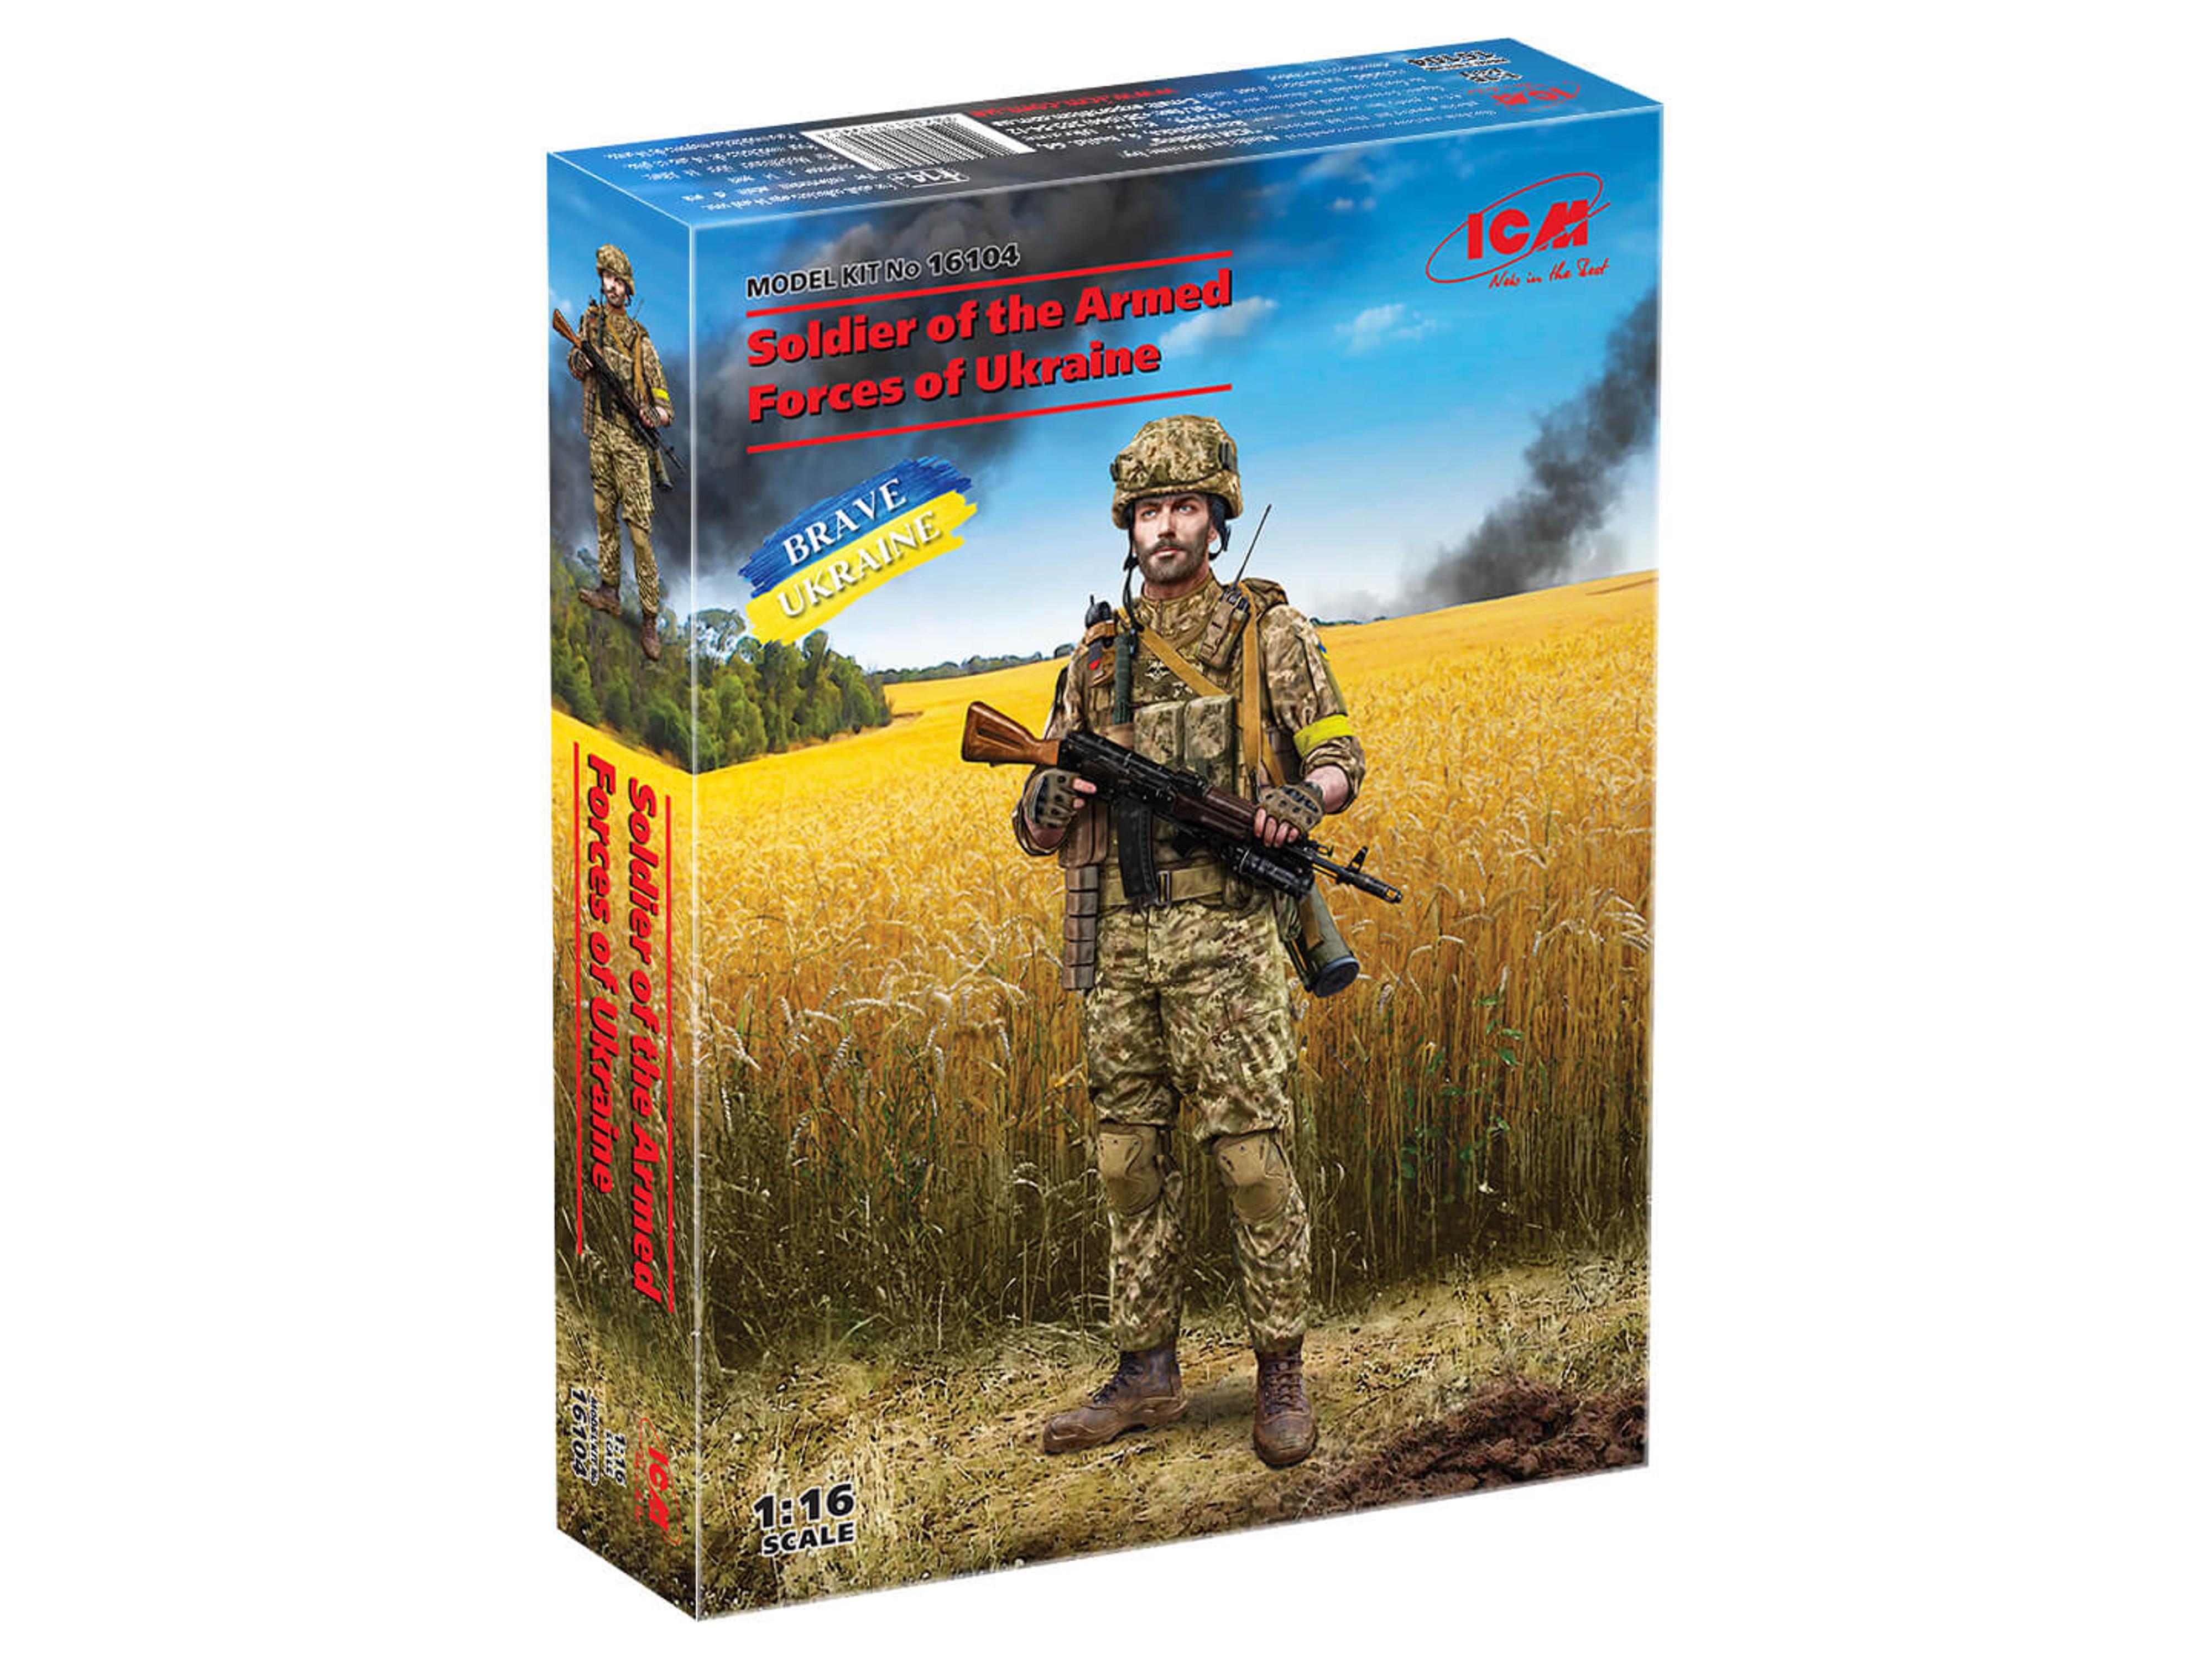 ICM 1/16 Soldier of the Armed Forces of Ukraine Model Kit